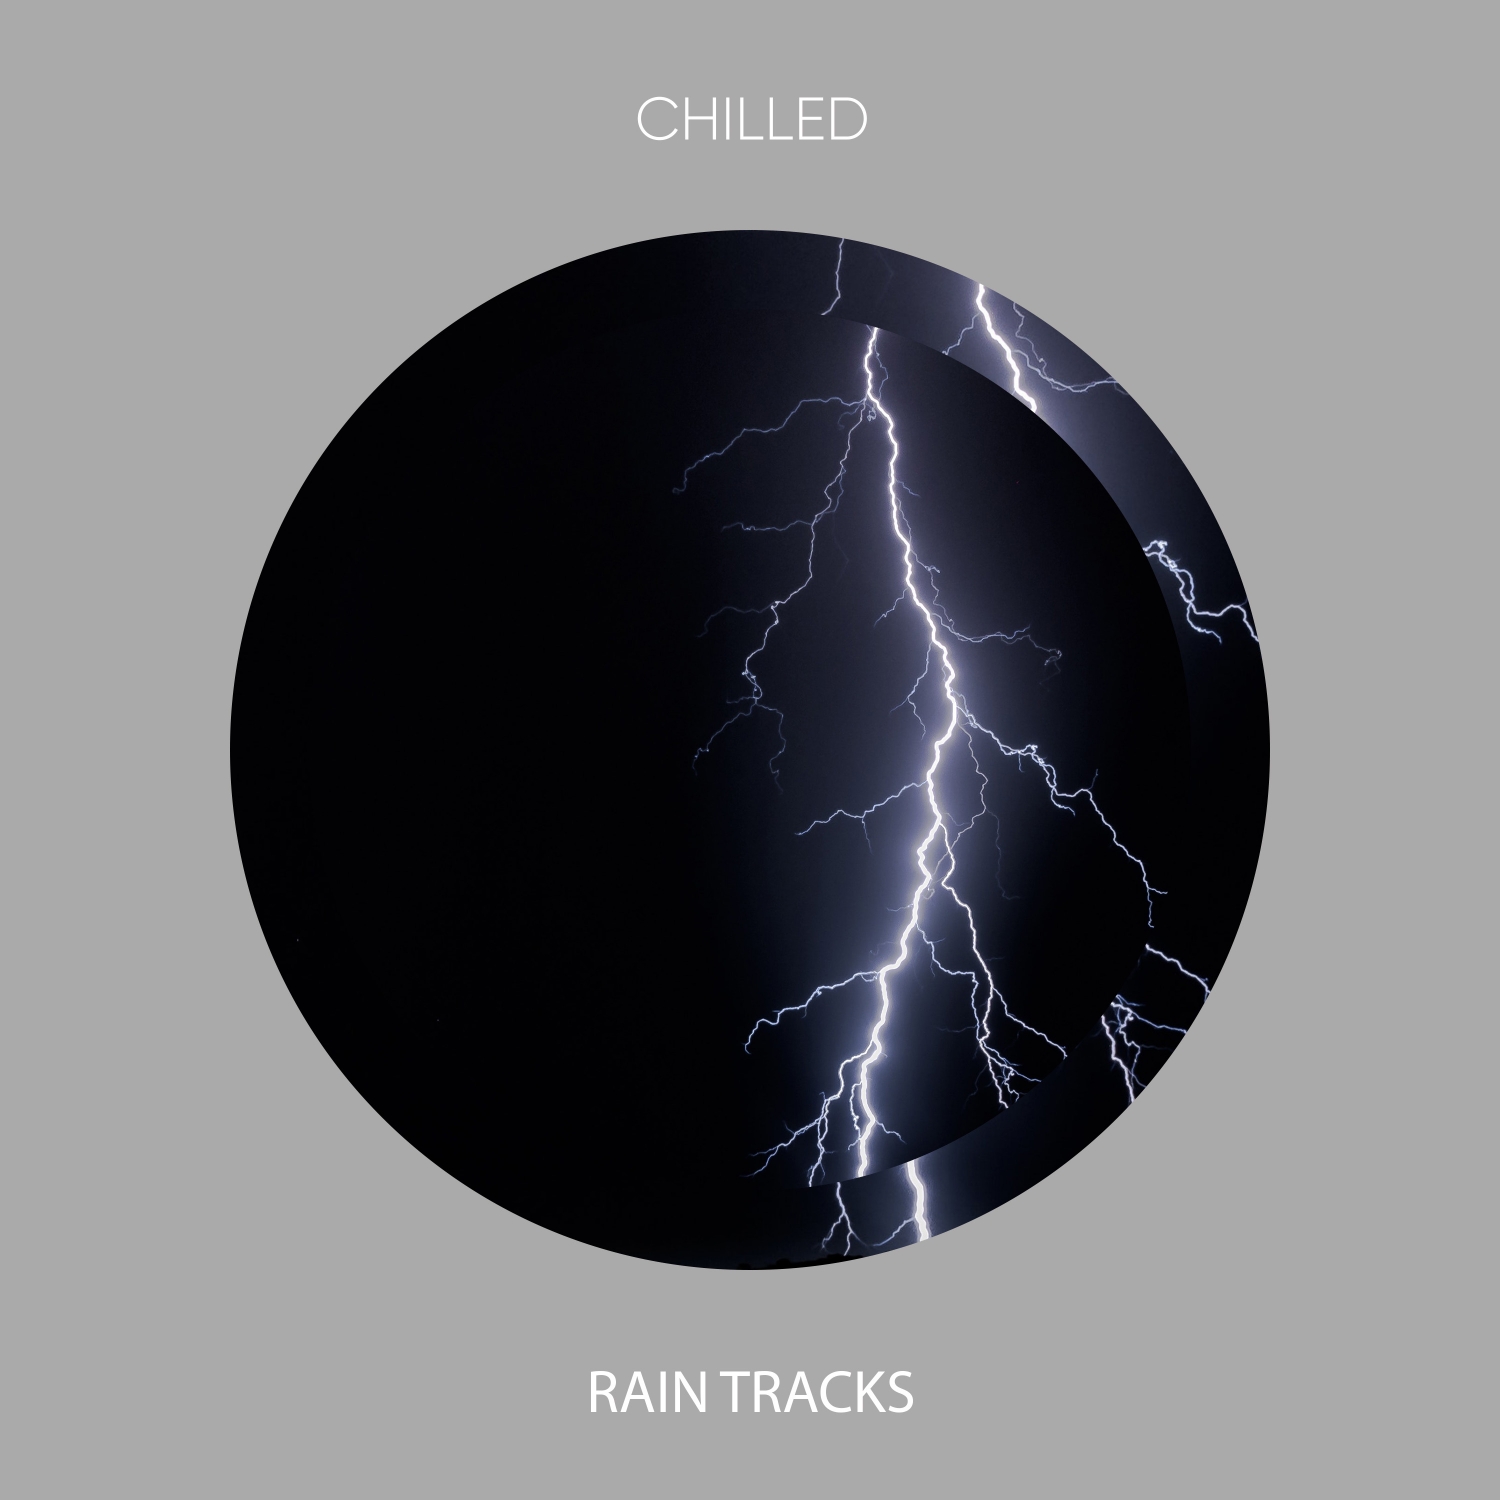 12 Chilled Rain Tracks for Anxious Minds